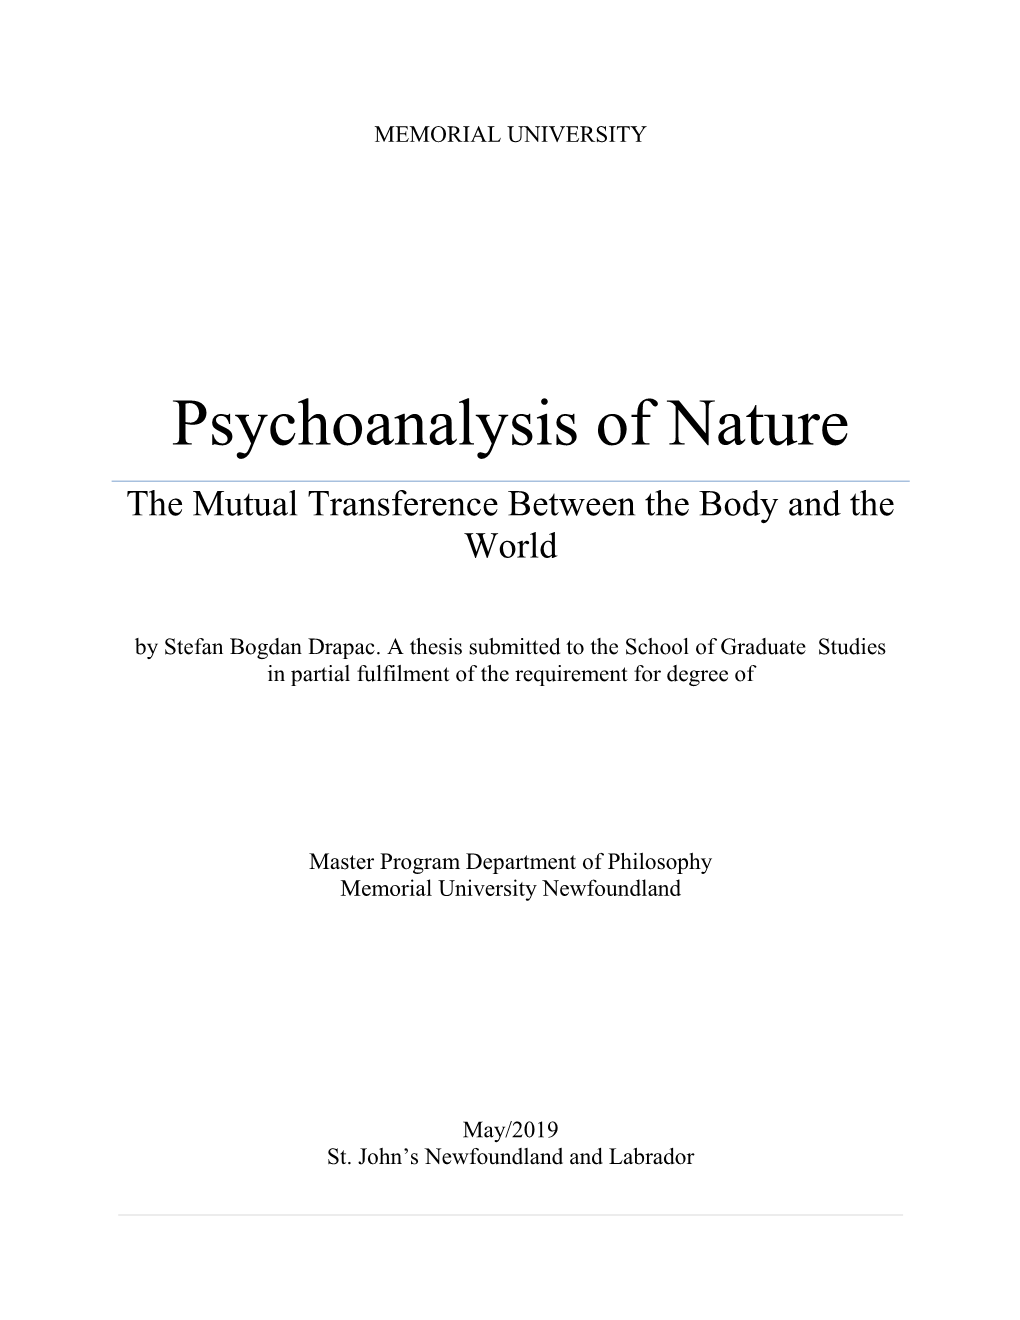 Psychoanalysis of Nature the Mutual Transference Between the Body and the World